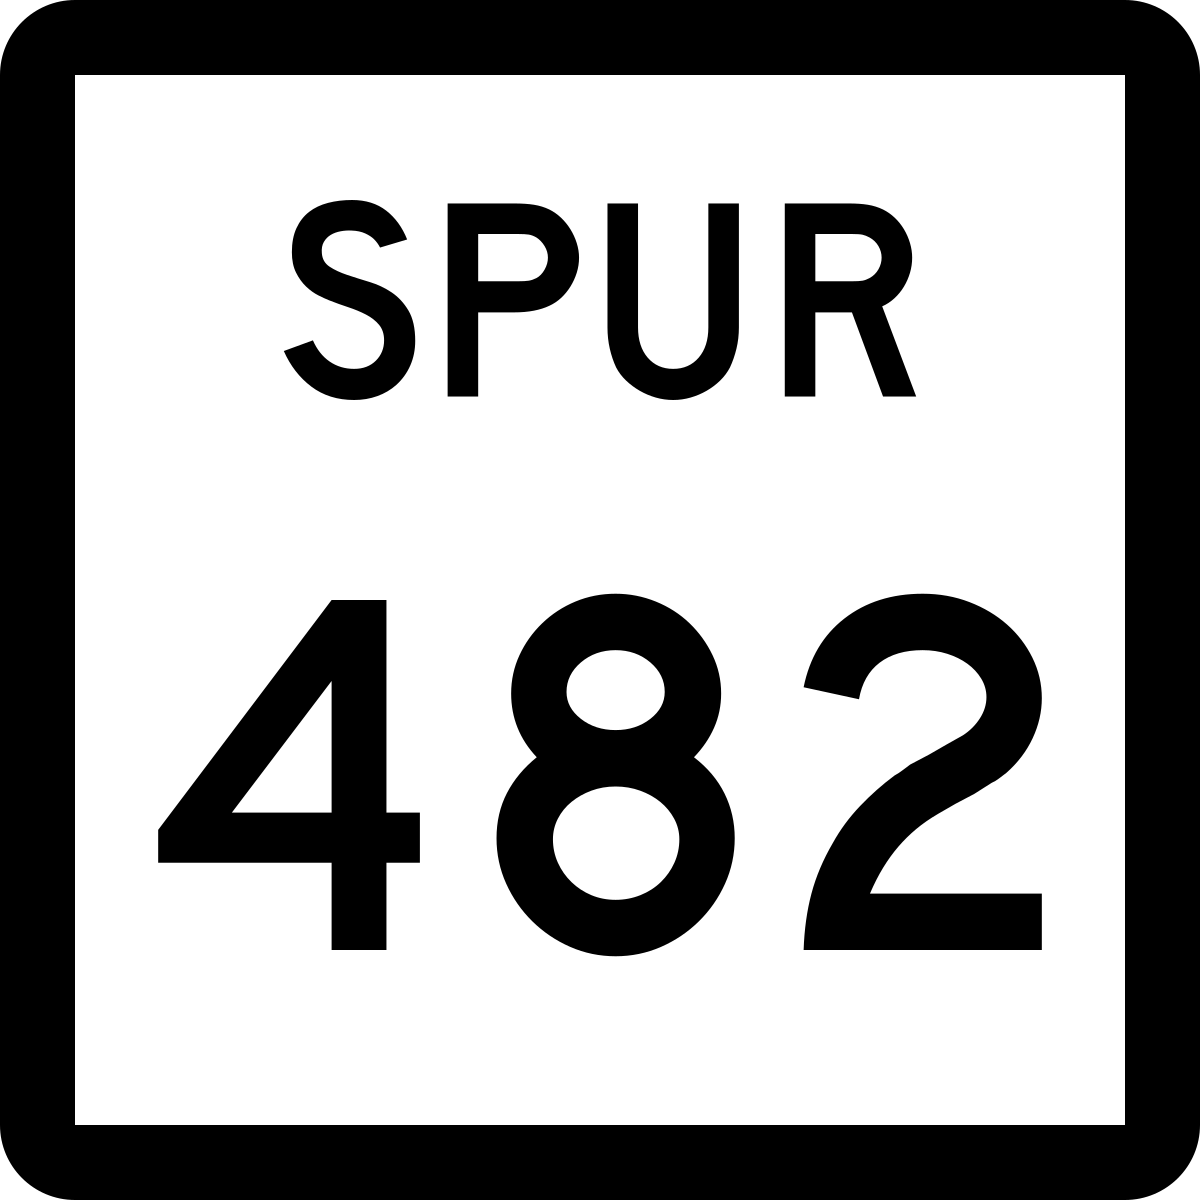 Texas State Highway Spur 482 - Wikipedia